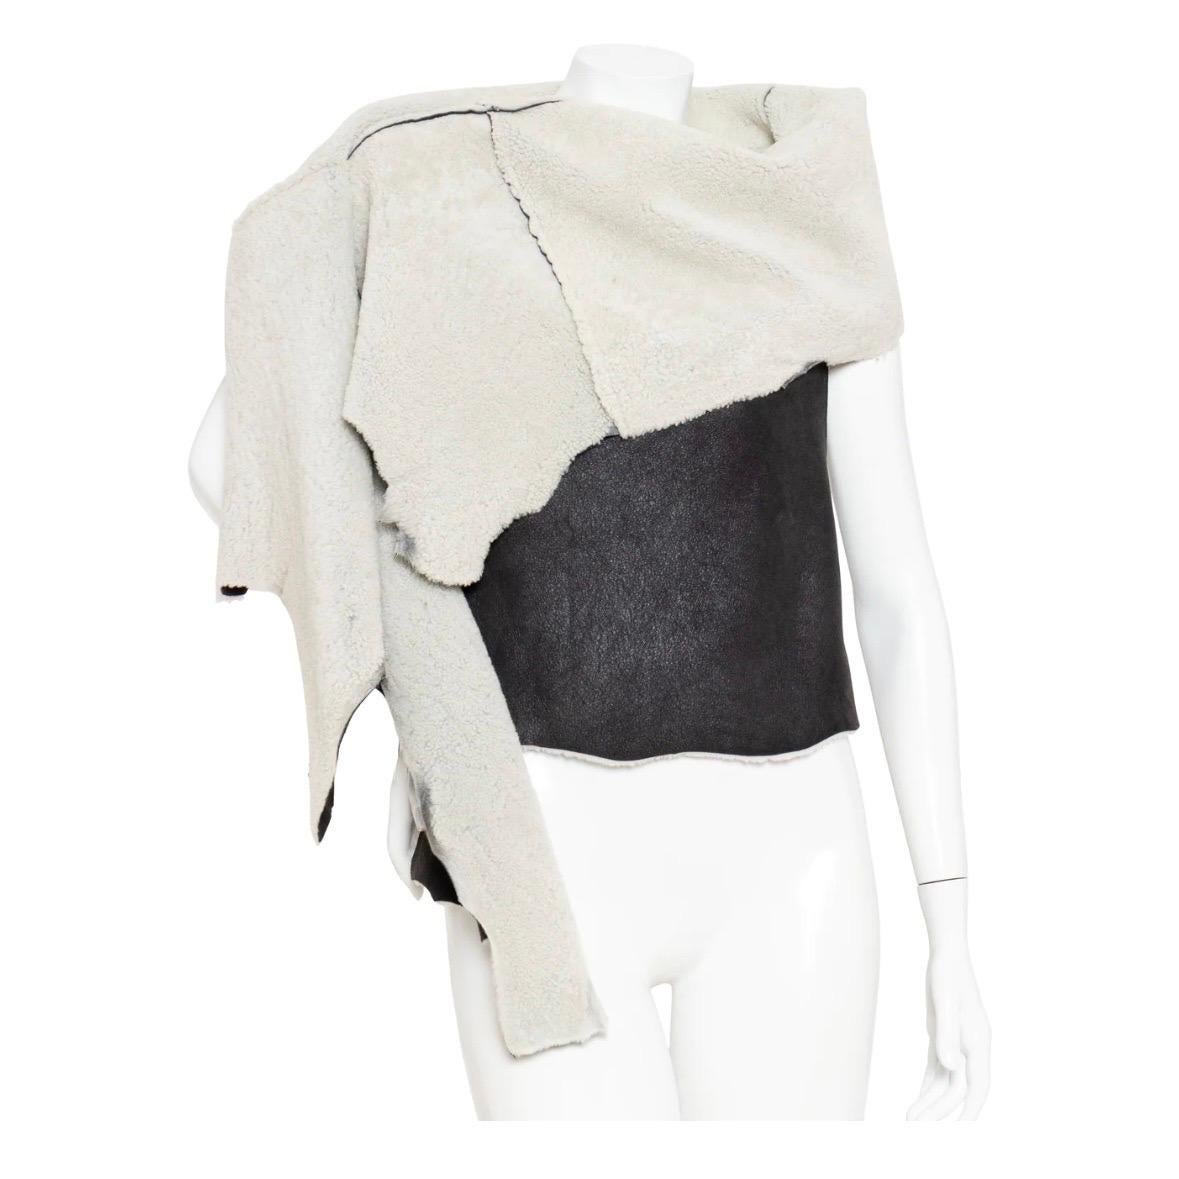 Shearling Black Wrap by Ann Demeulemeester
Black/Natural Light Gray
Sleeveless
Wrap top
Smooth exterior with shearling lining
Cowl neck with asymmetrical draping
Made in Italy
100% sheep fur; origin: Portugal
Size & Measurements
Approximate